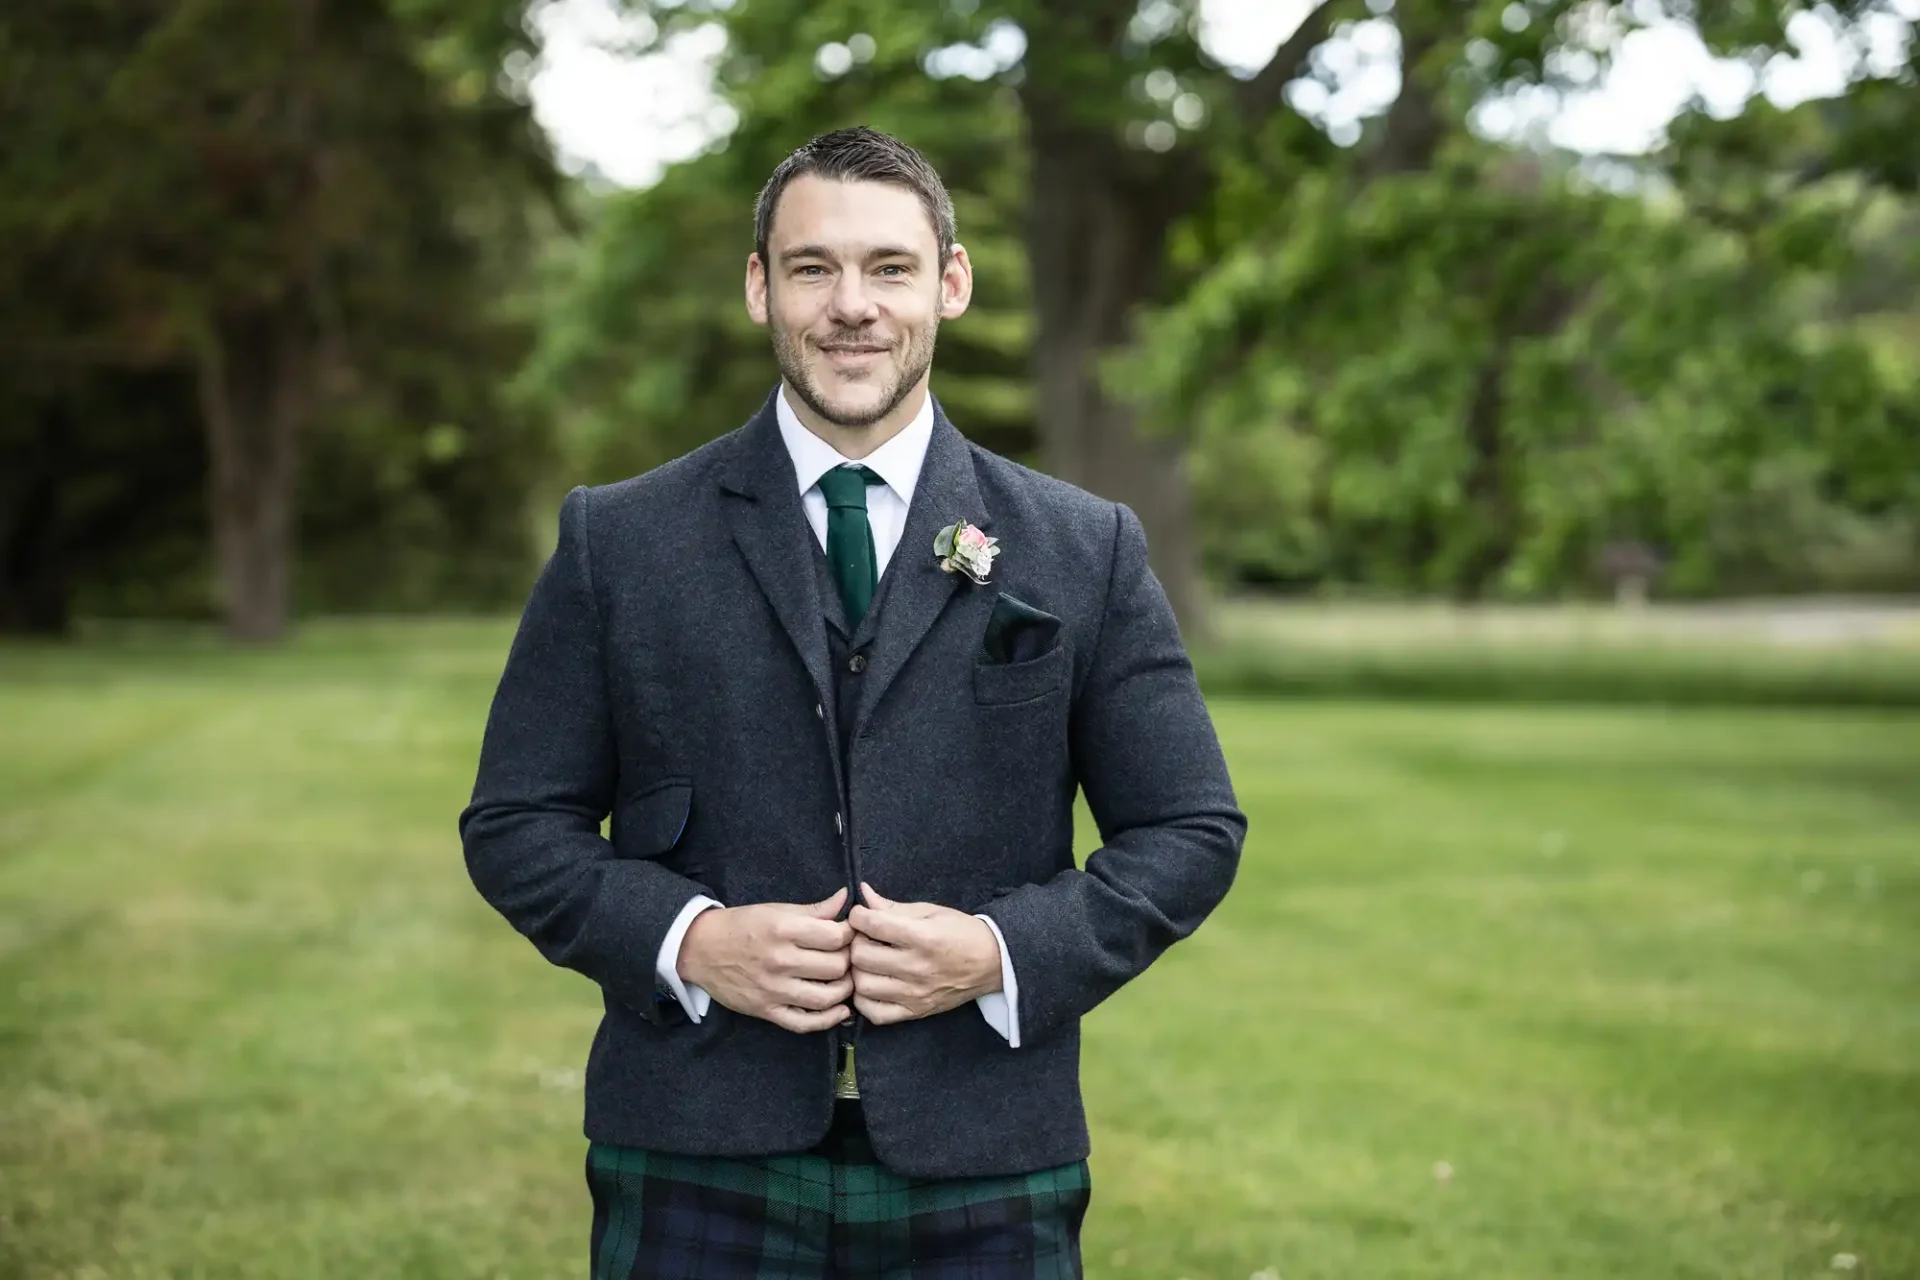 Man in traditional scottish attire, including a kilt and tweed jacket, smiling in a lush garden setting.